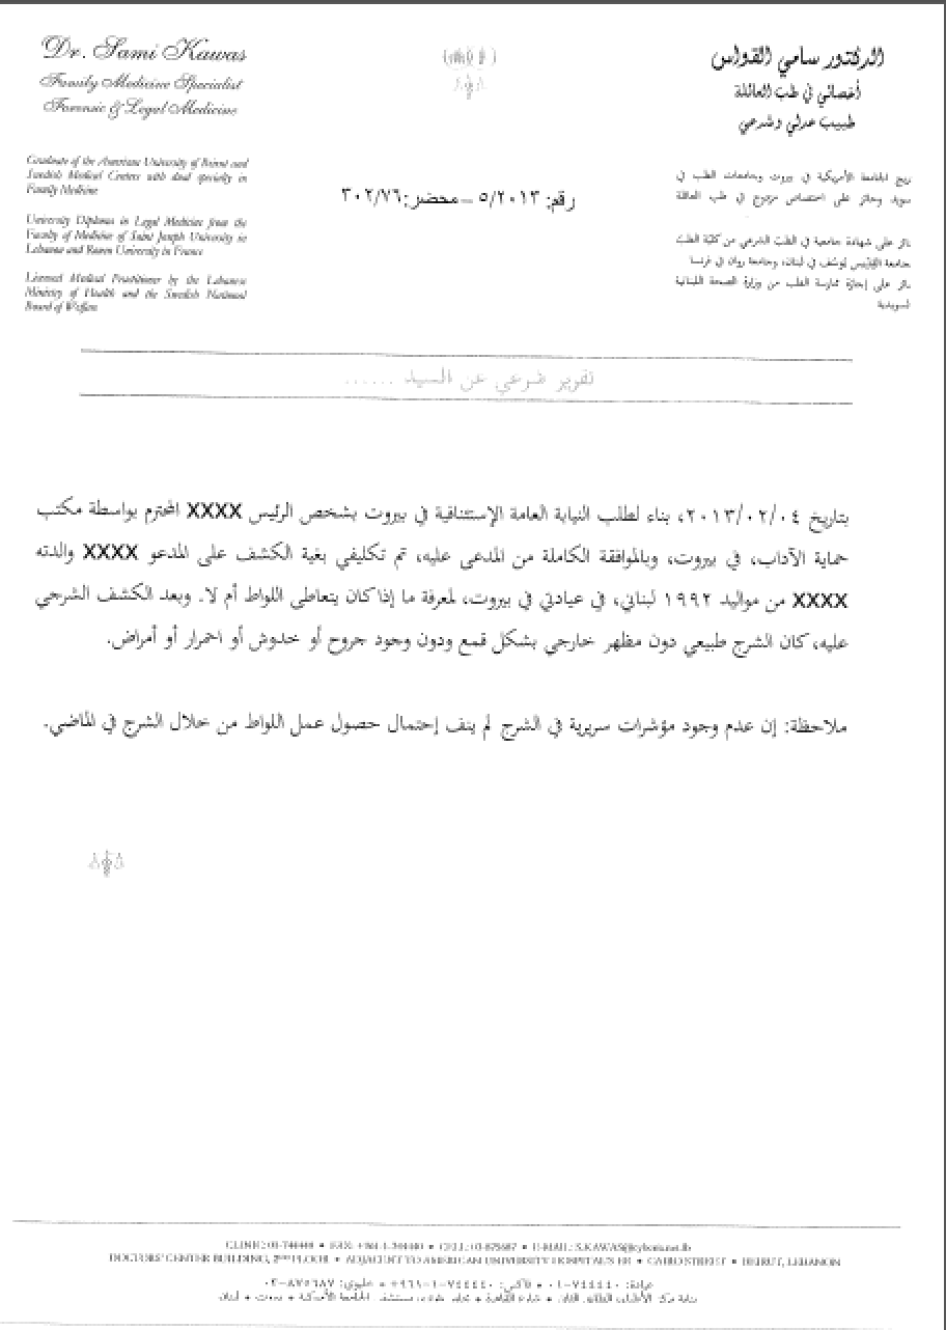 Image is a letter of correspondence with Dr. Sami Kawas